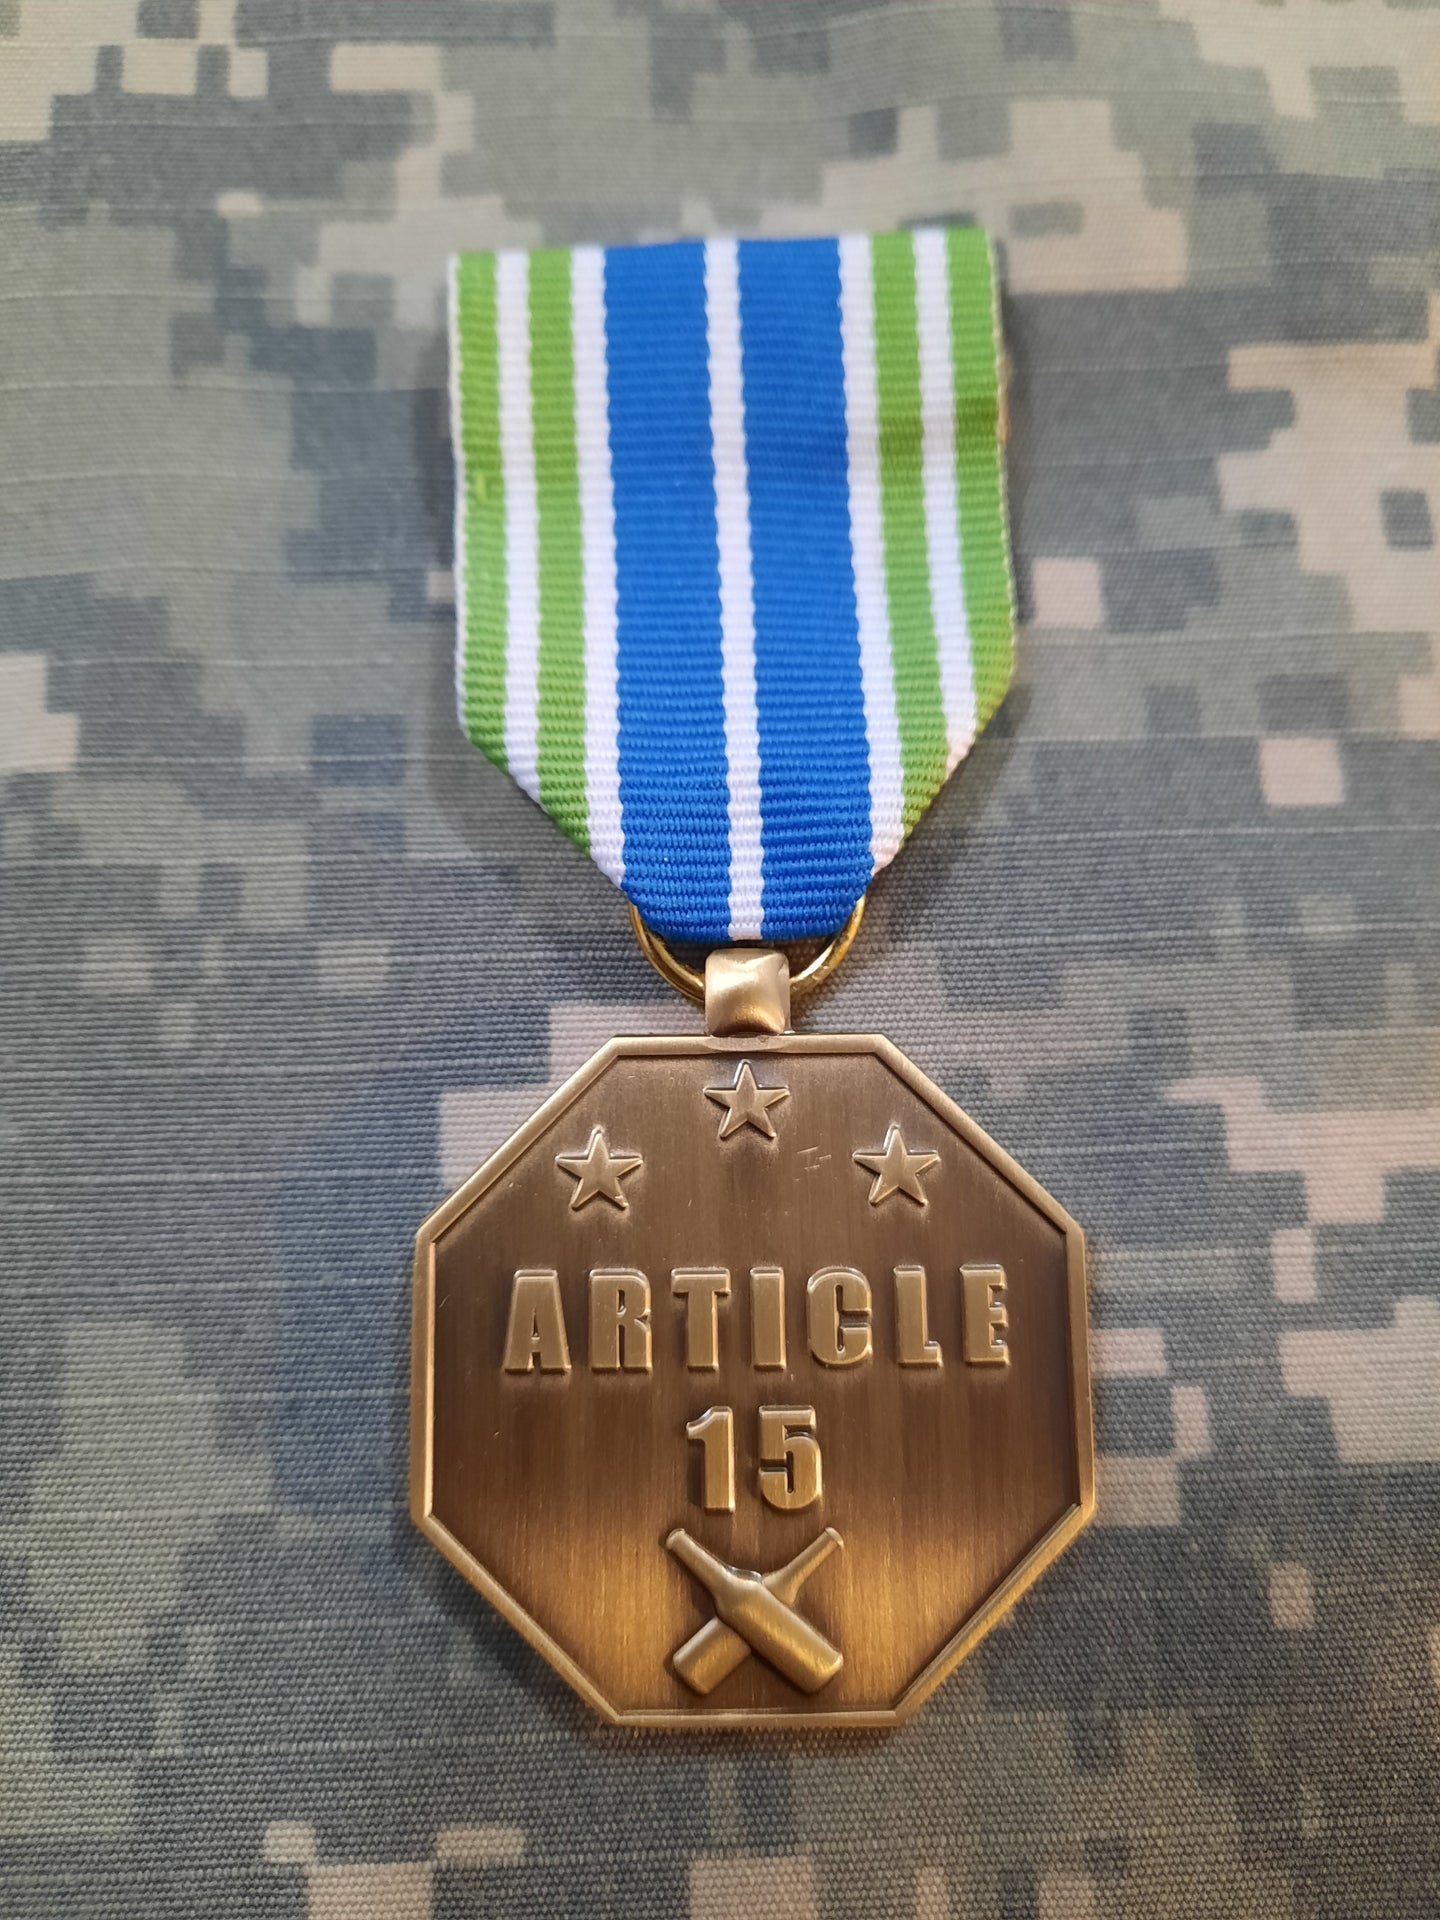 ARTICLE 15 MEDAL